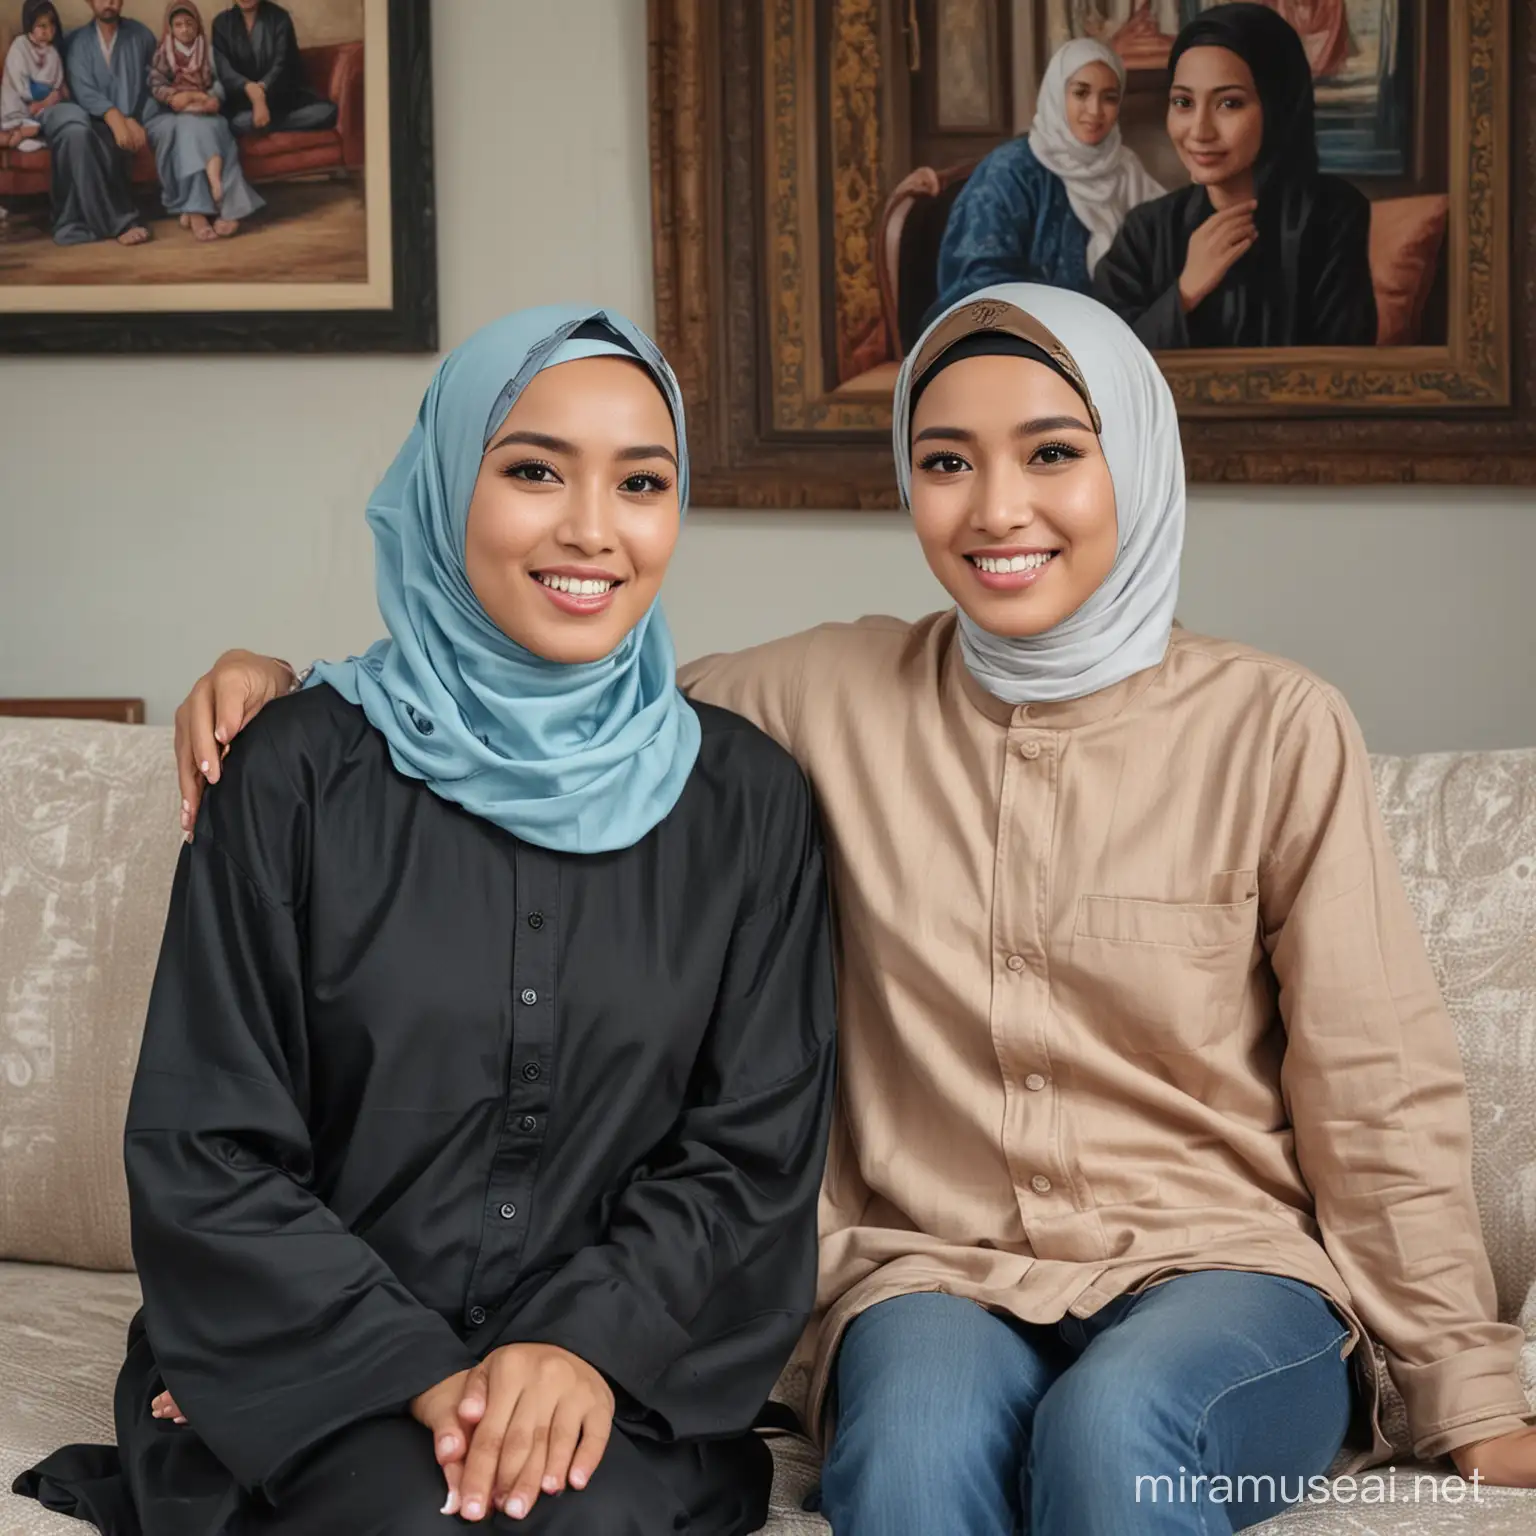 Young Indonesian Couple Sitting on Sofa with Portrait Behind